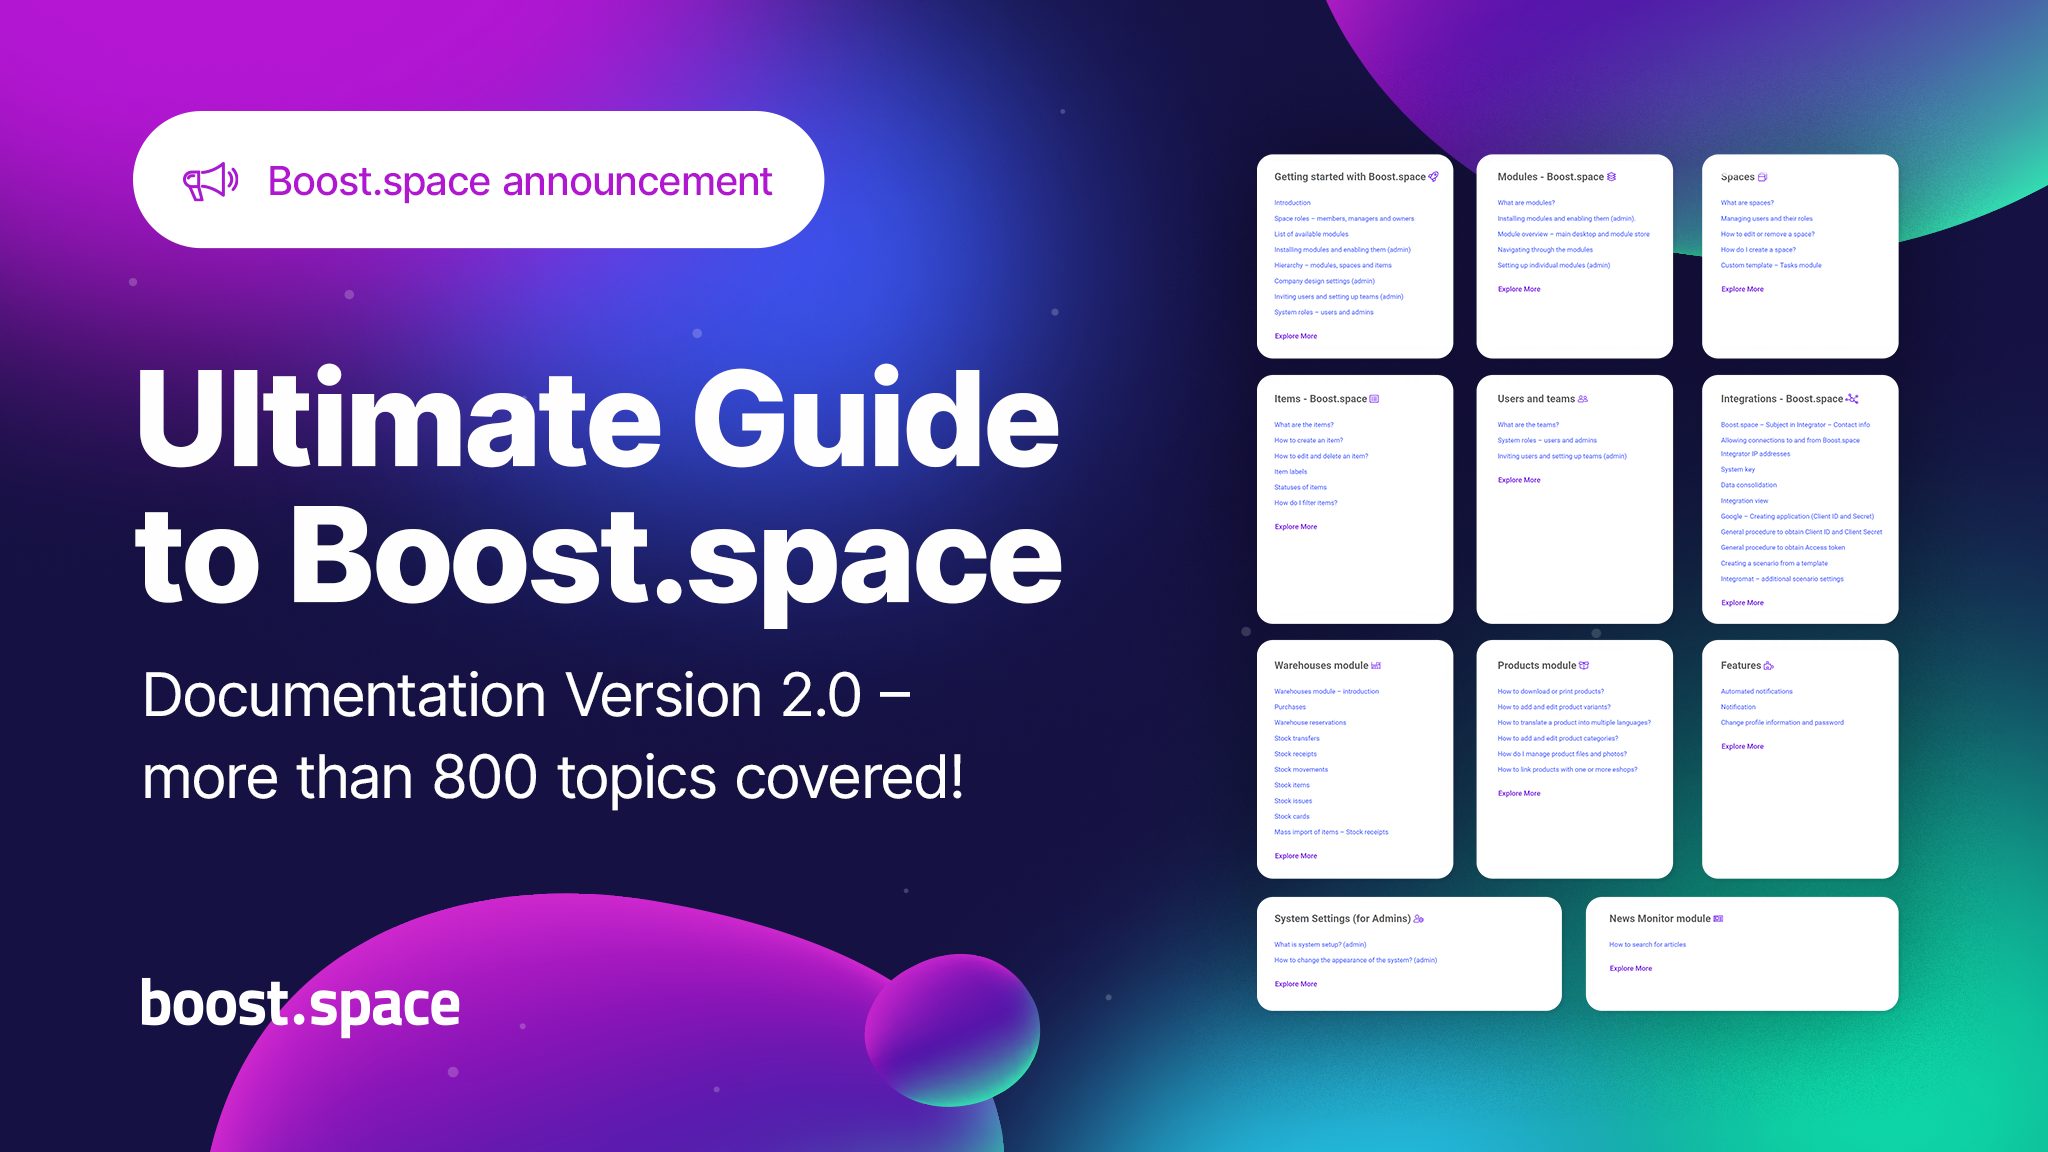 Documentation version 2.0 is here!